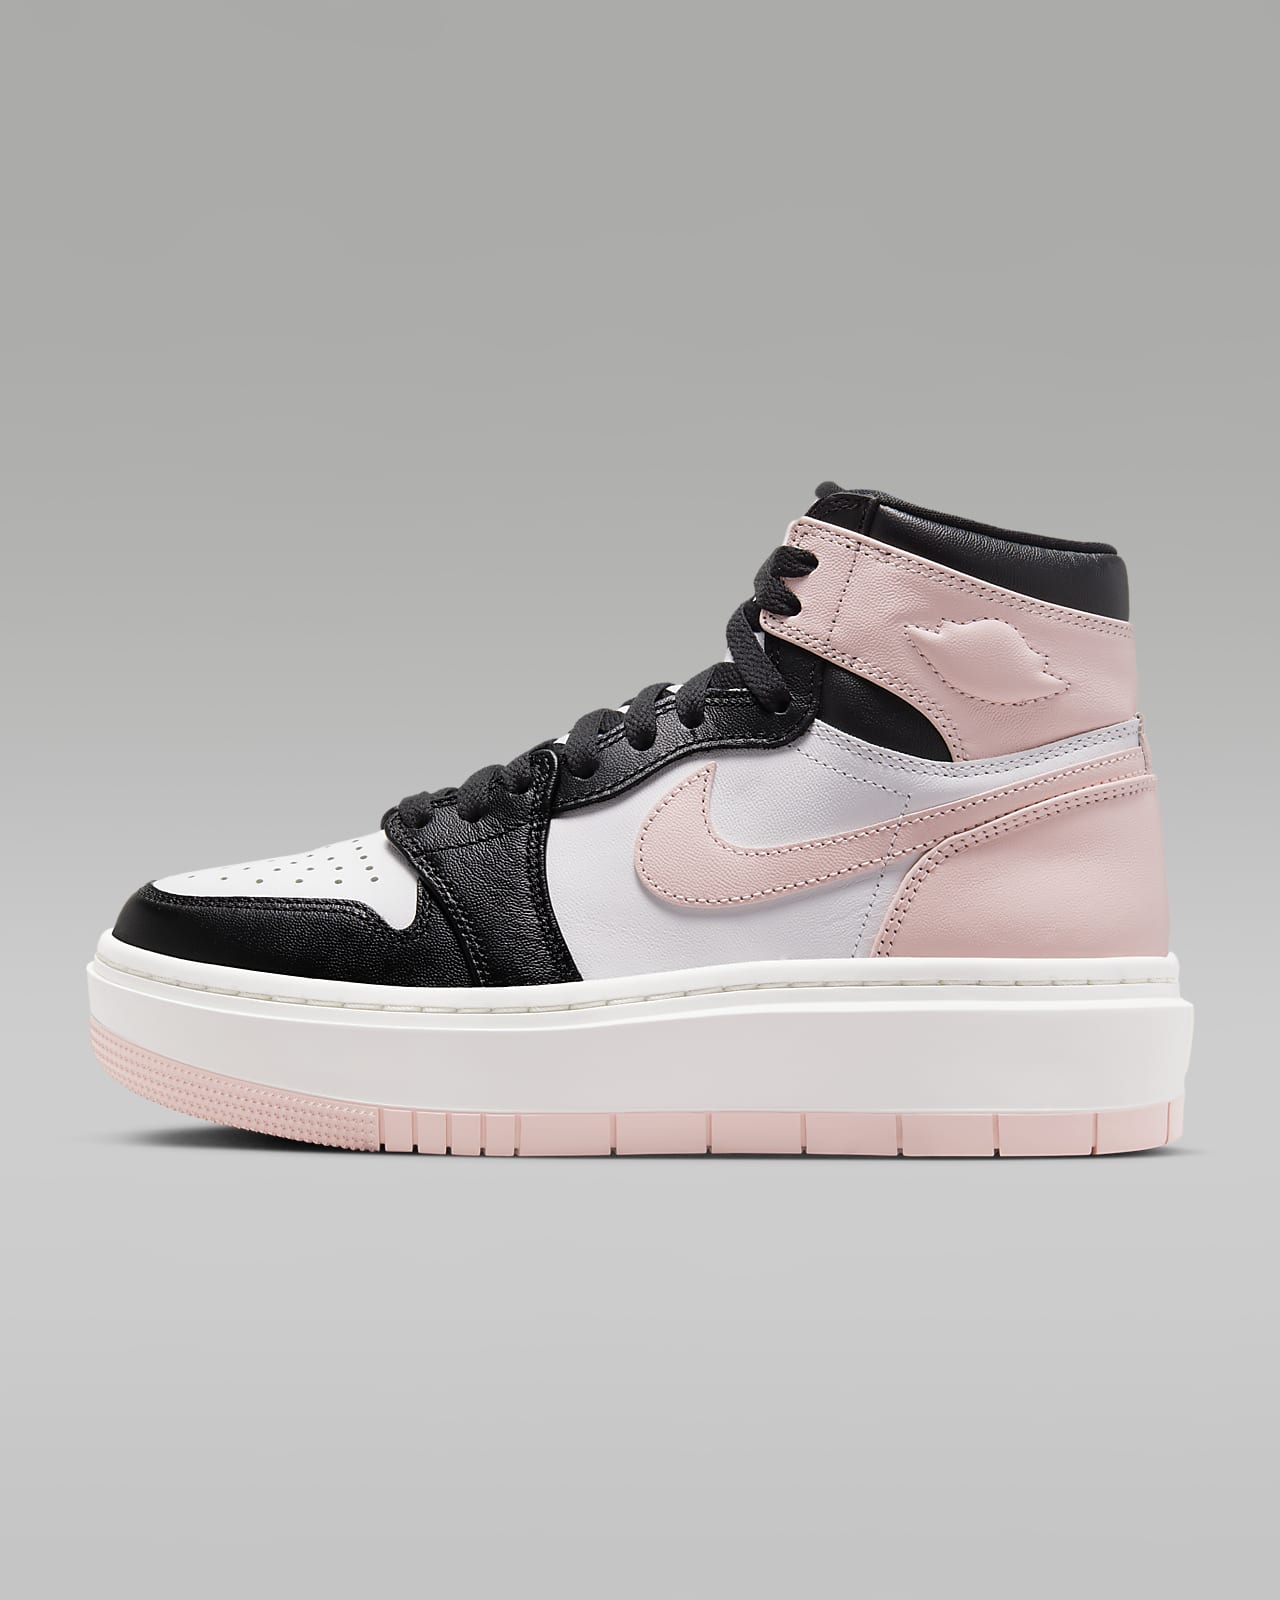 Bold, Beautiful, and Beyond: Why Air Jordan 1 Elevate High is the Must-Have Shoe for Women!